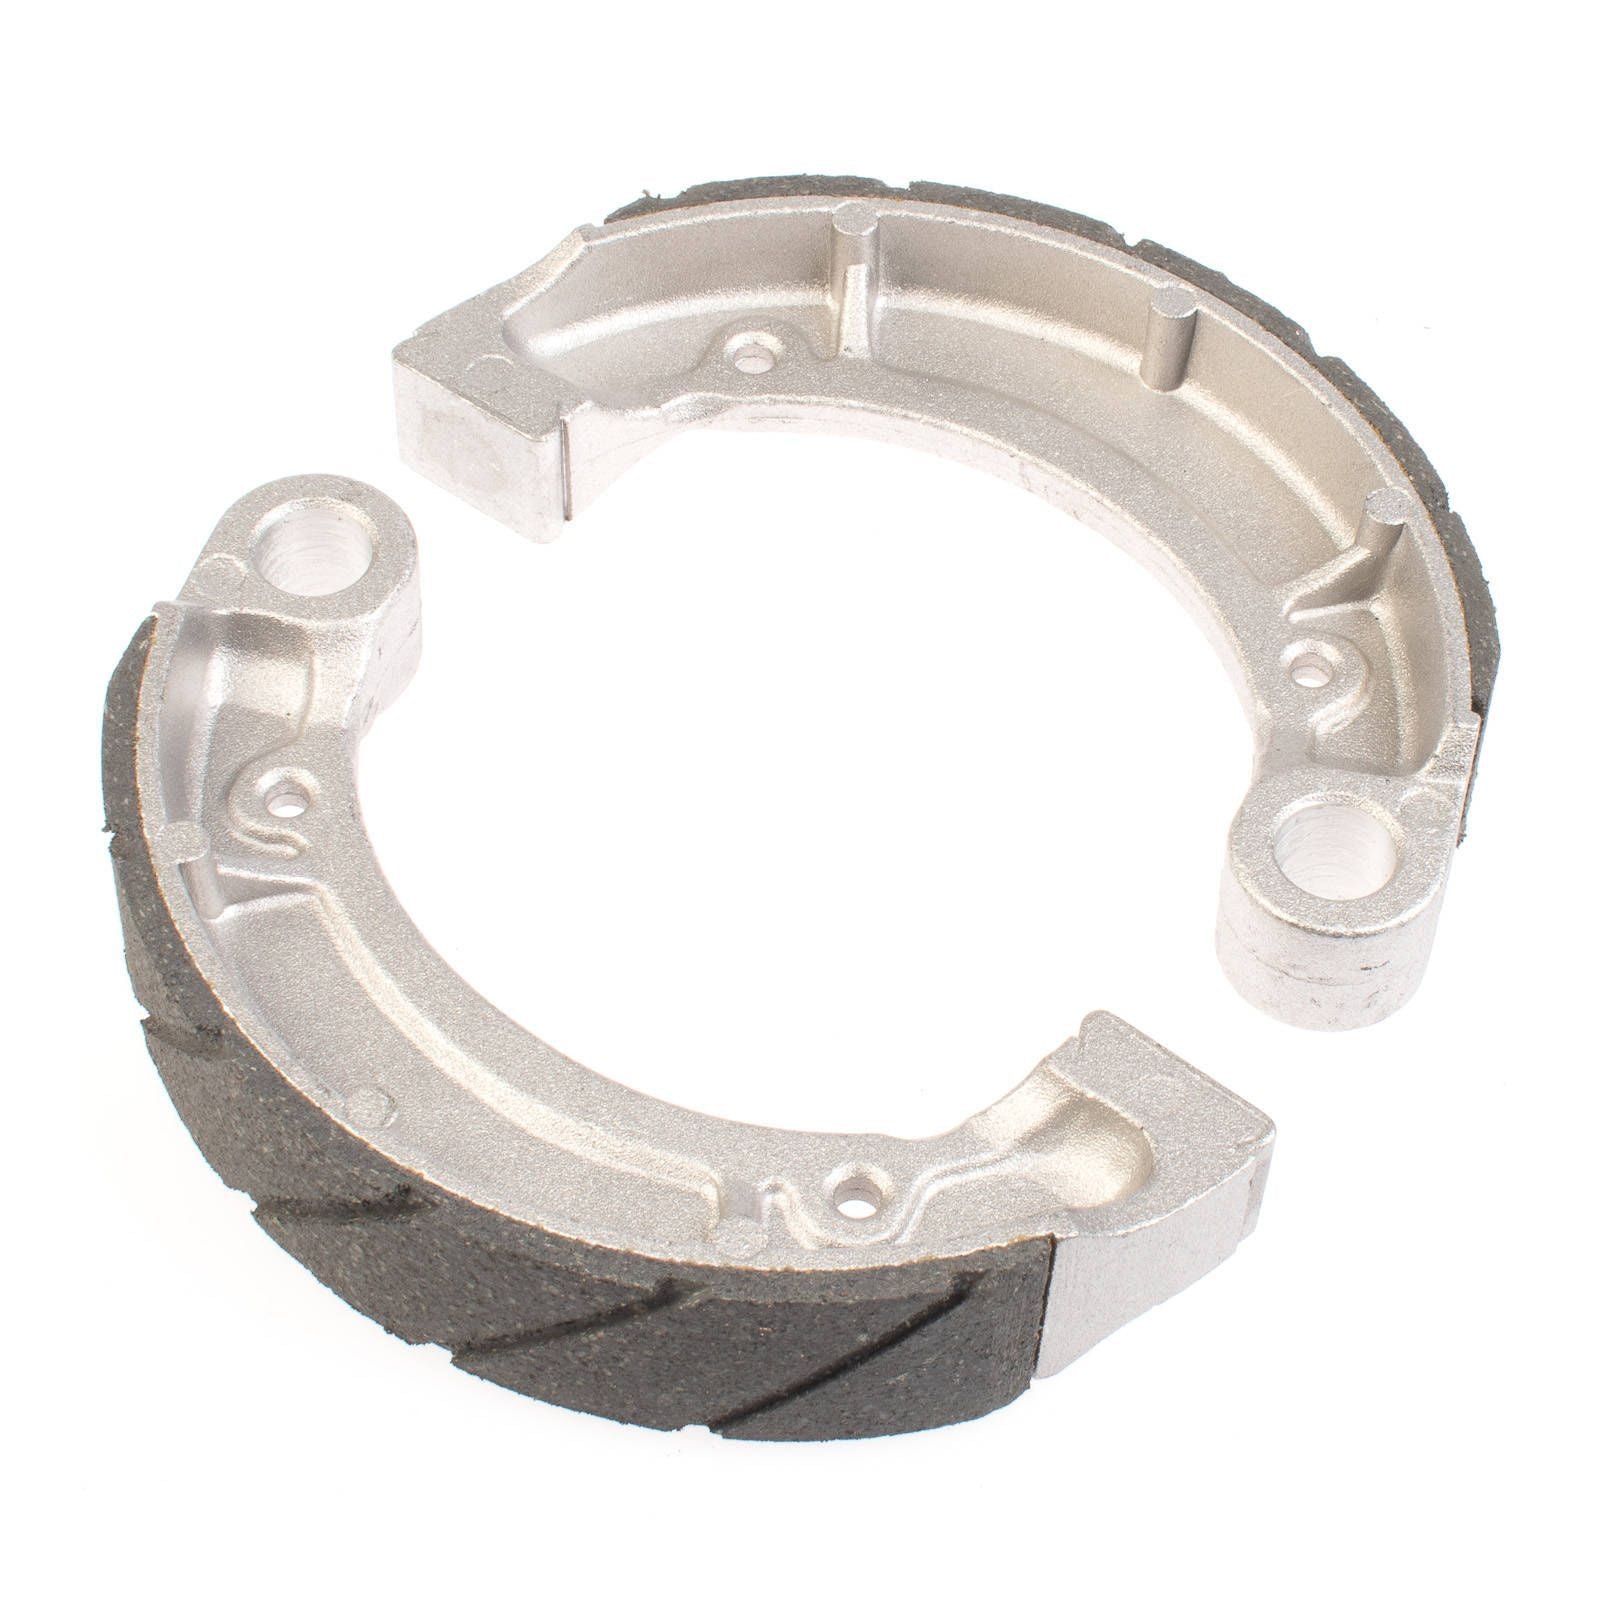 New WHITES Motorcycle Brake Shoes - Water Groove #WPBS27279